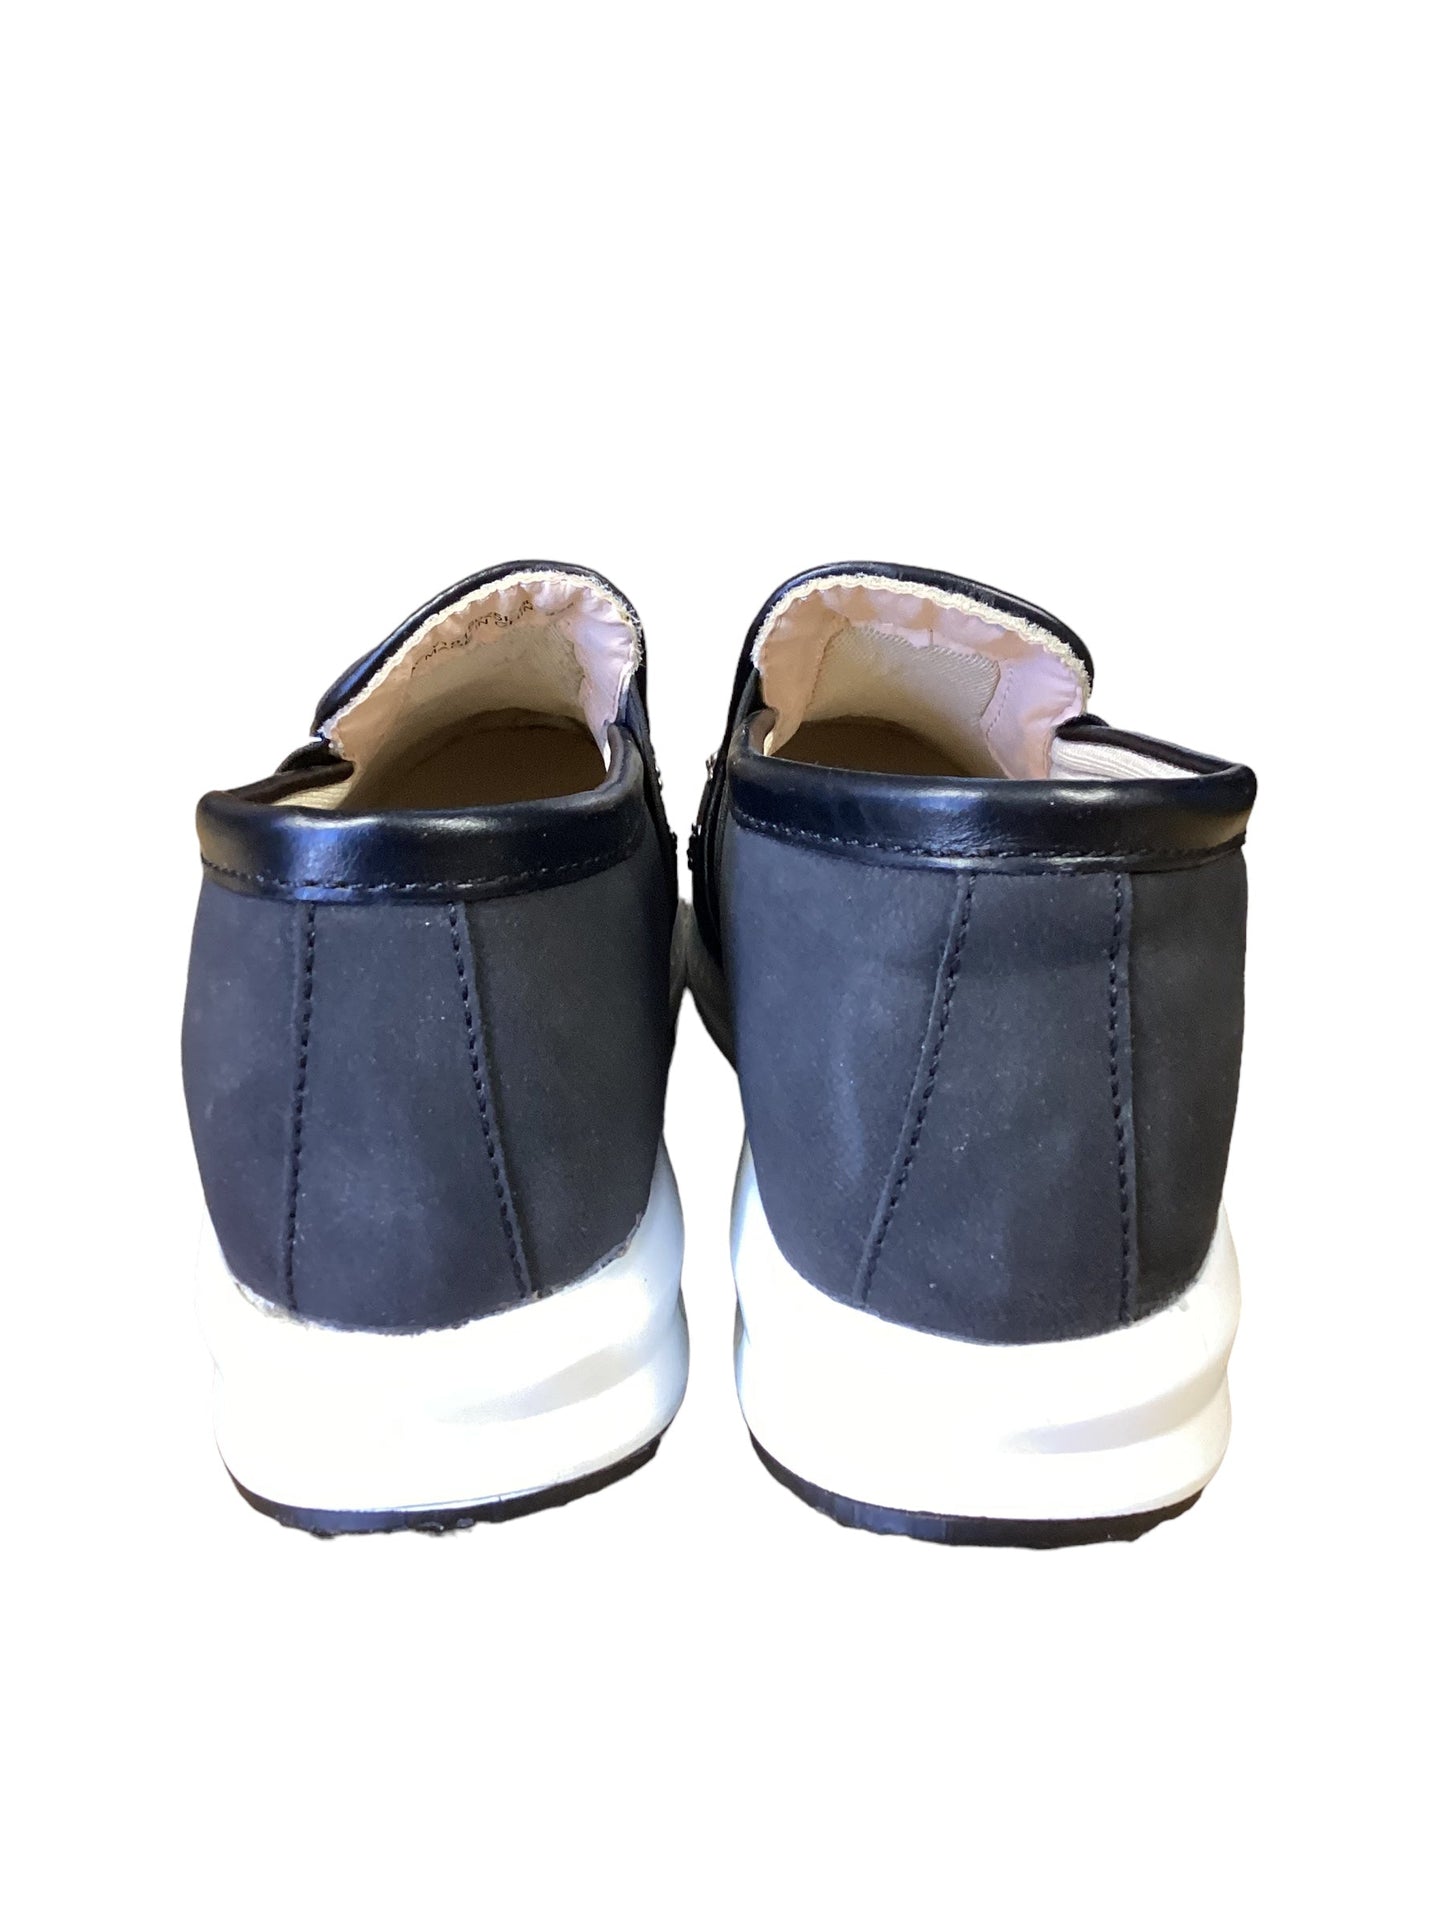 Black Shoes Sneakers Clothes Mentor, Size 7